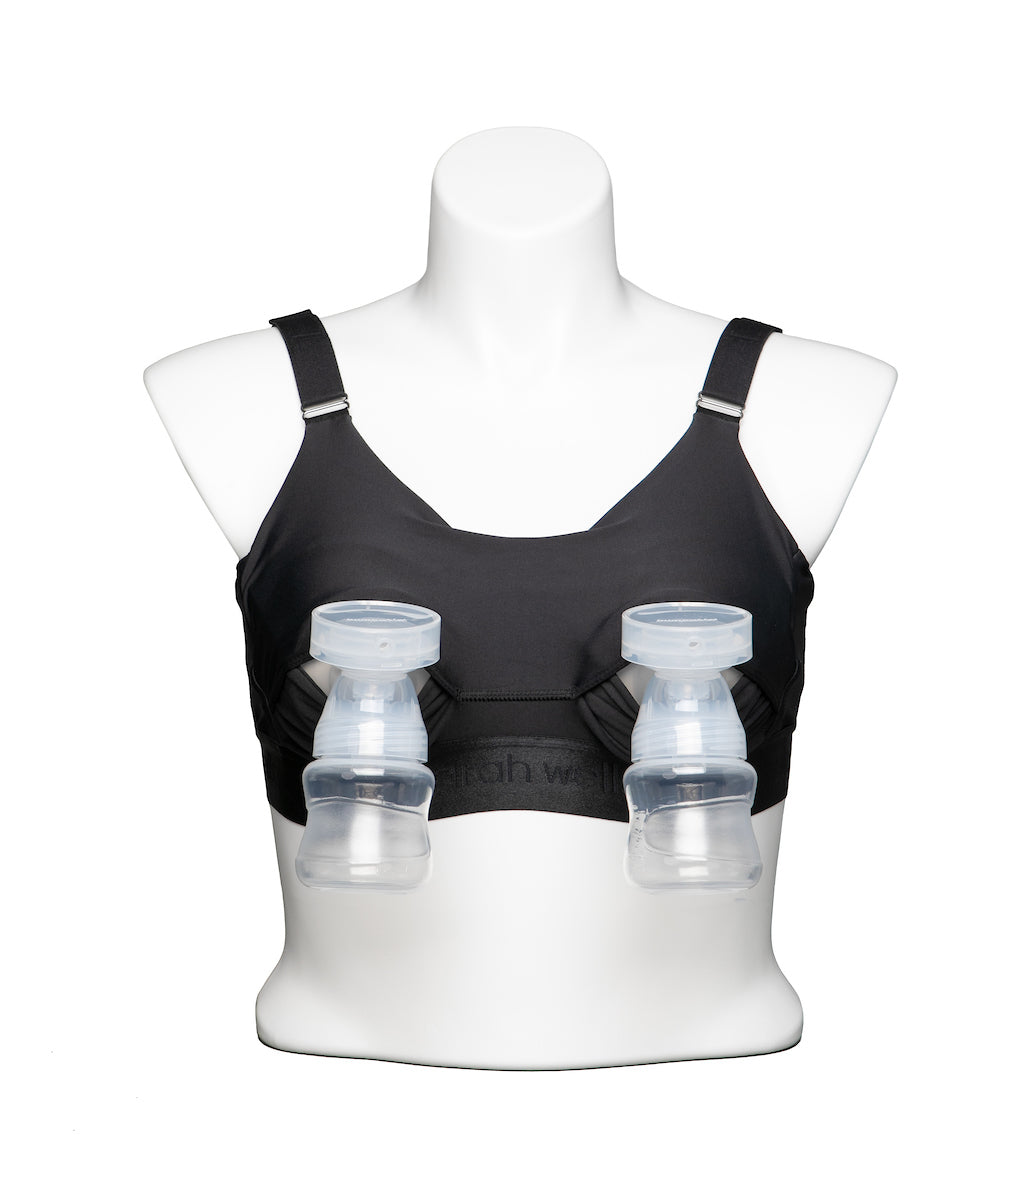 Best Pumping Bra For Spectra (Pump Hands Free with My Top 2 Picks